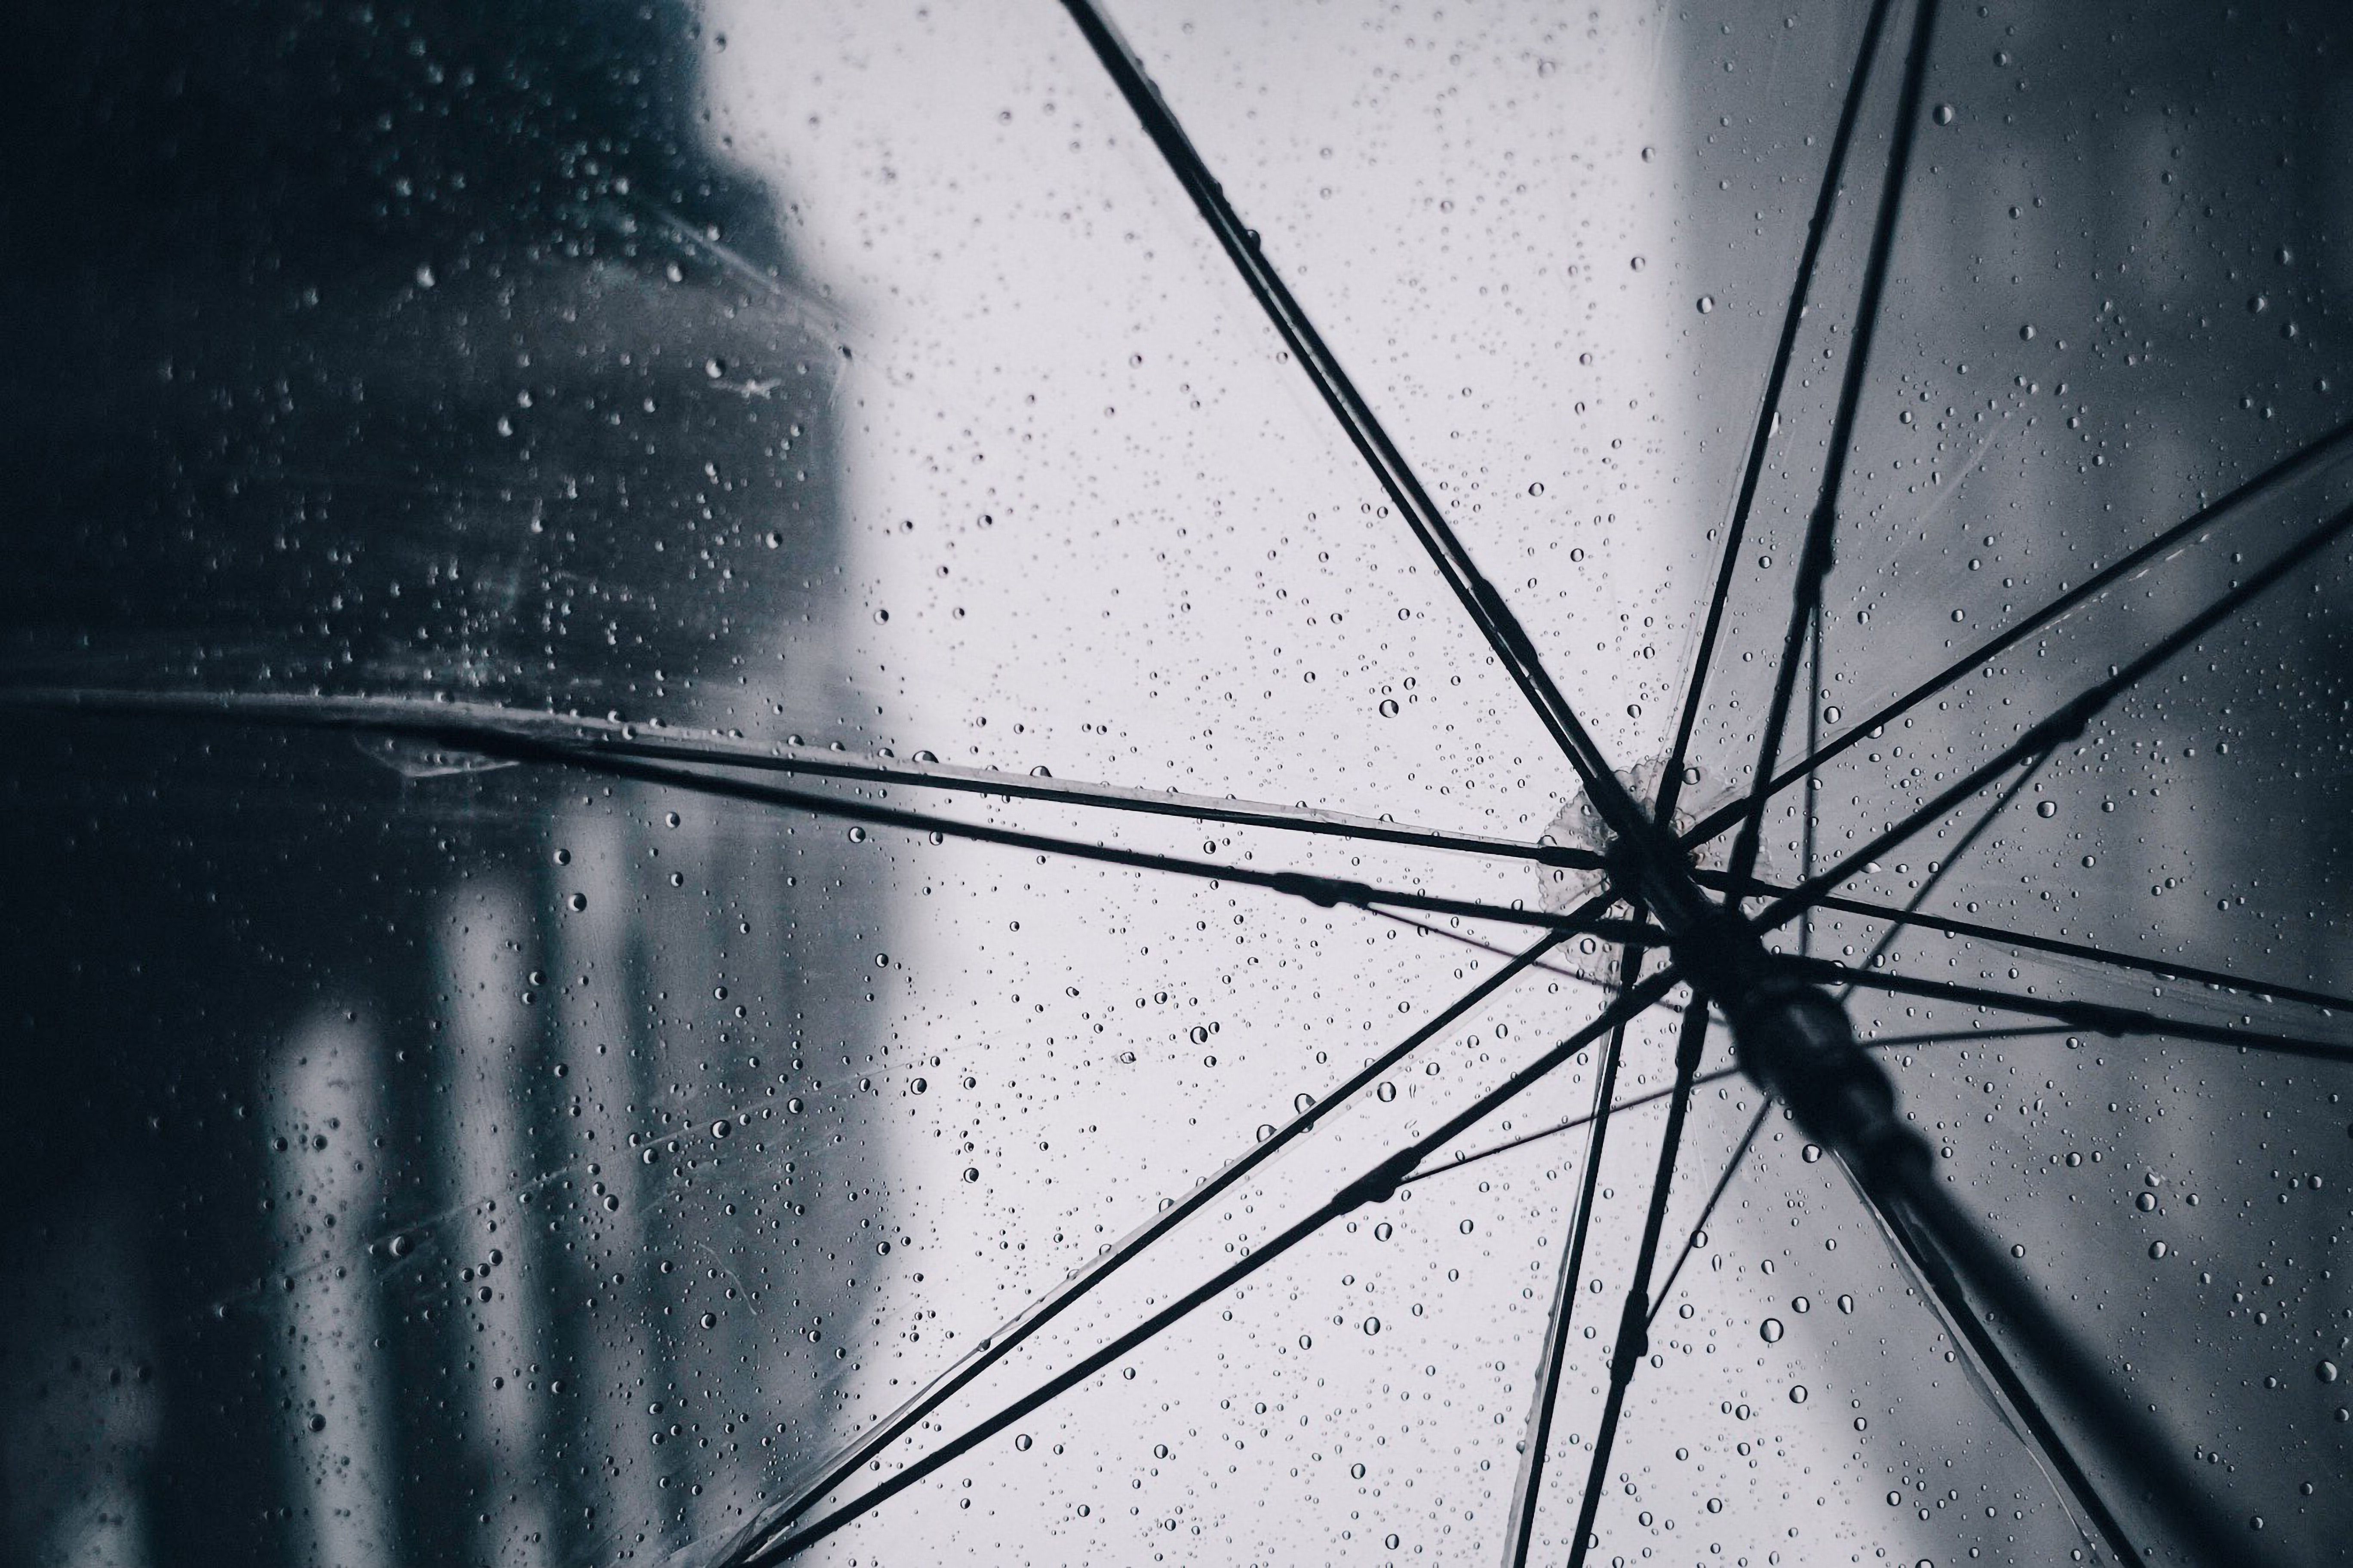 A black and white photo of an umbrella with raindrops on it - Rain